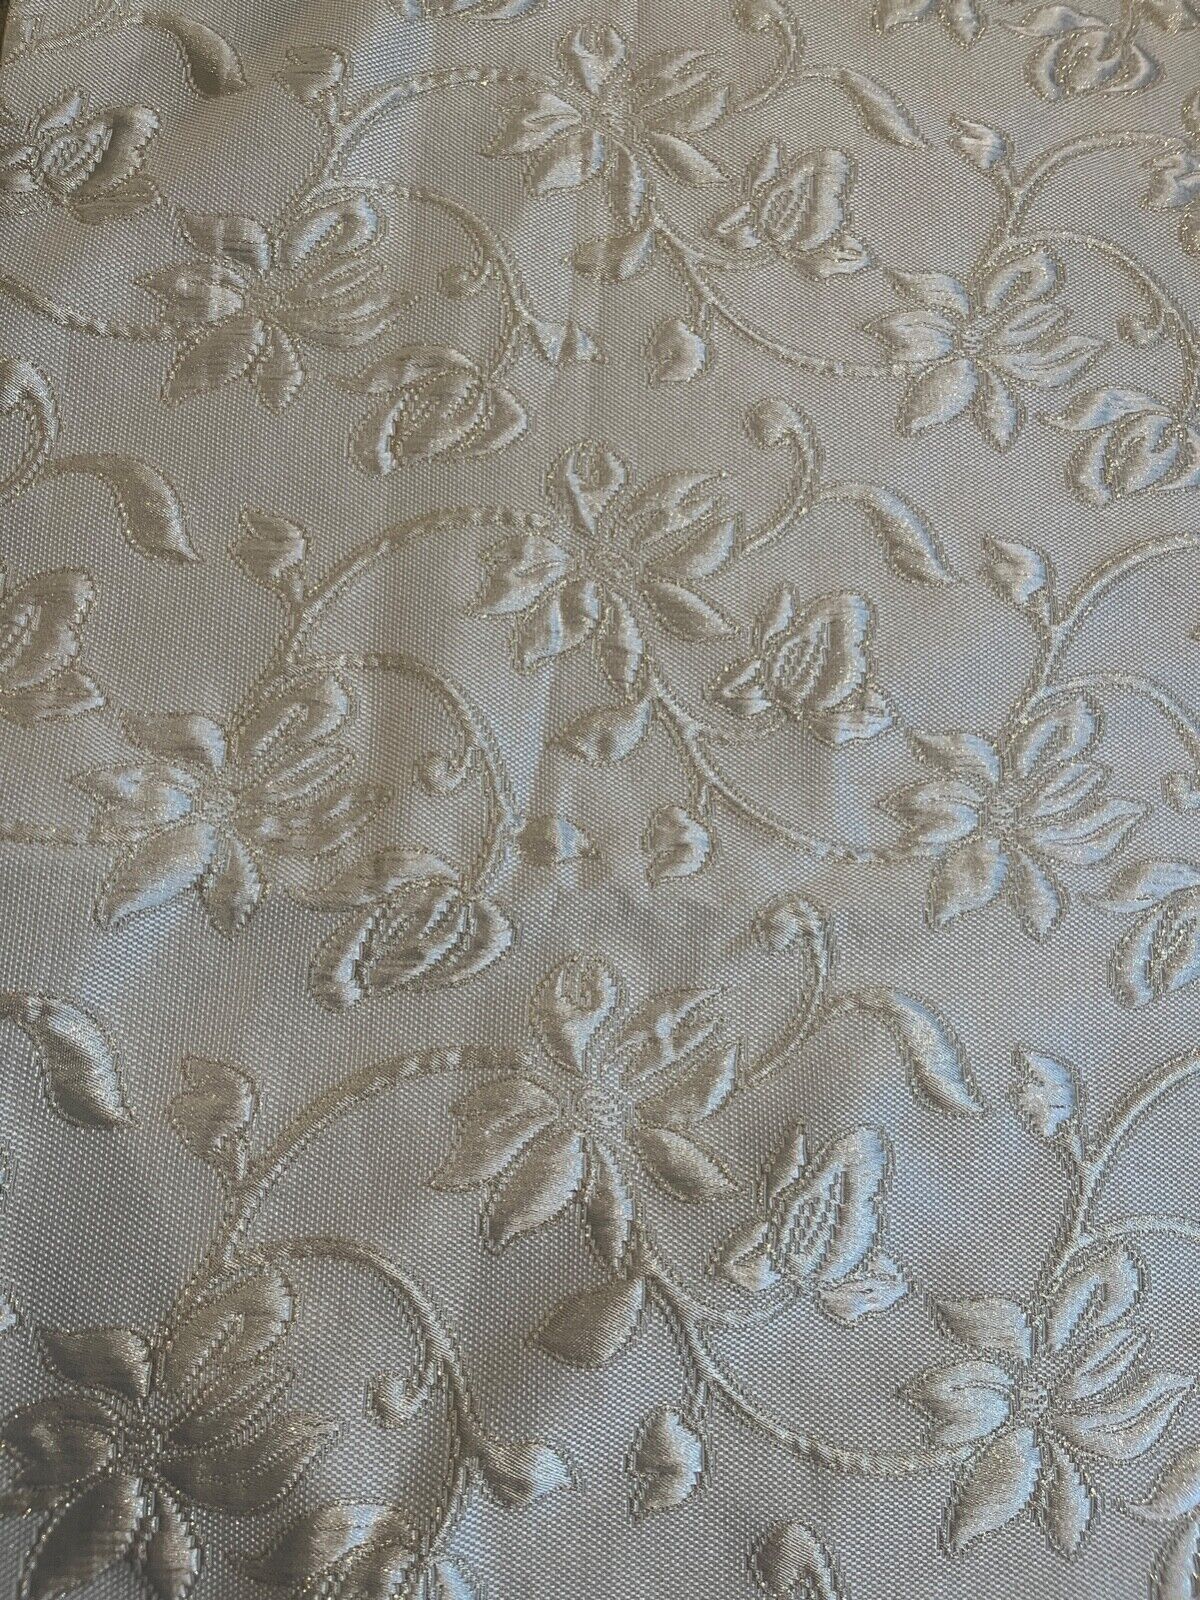 Vintage Rare 70s 80s Bed Coverlet Blanket Gold Thread  Appx. 93